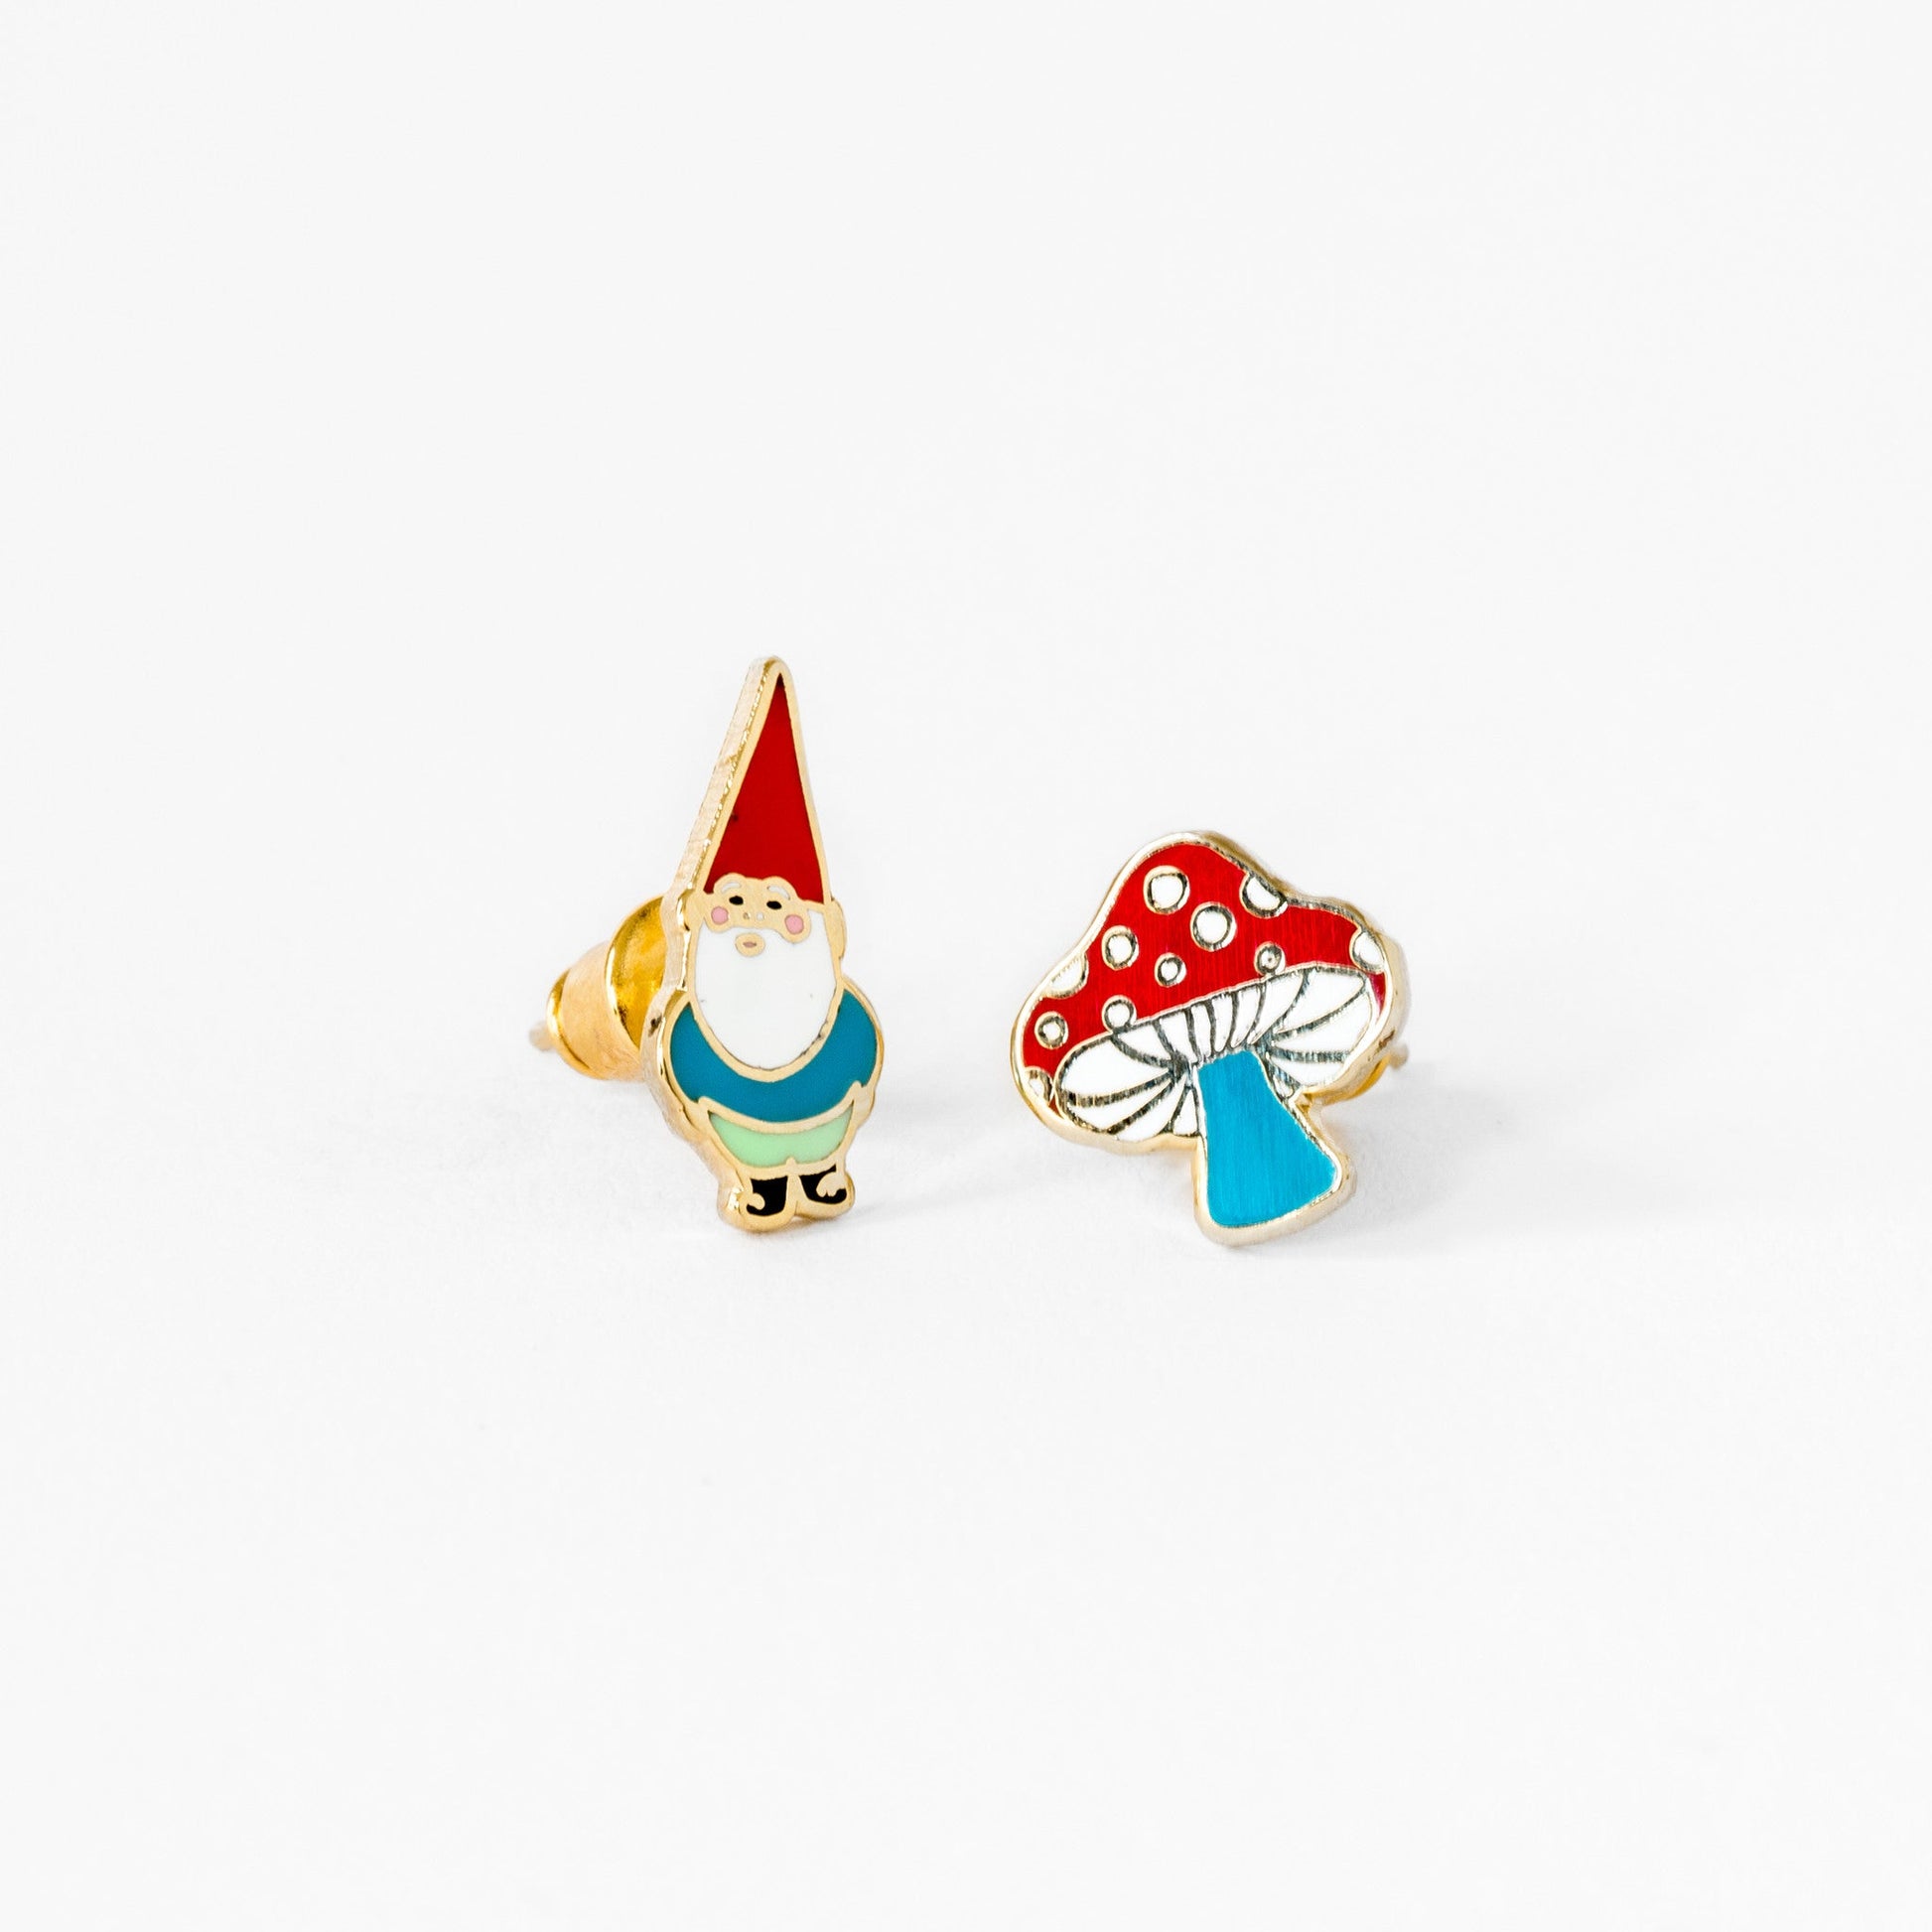 pair of earings, one a gnome, one a mushroom, on white background.